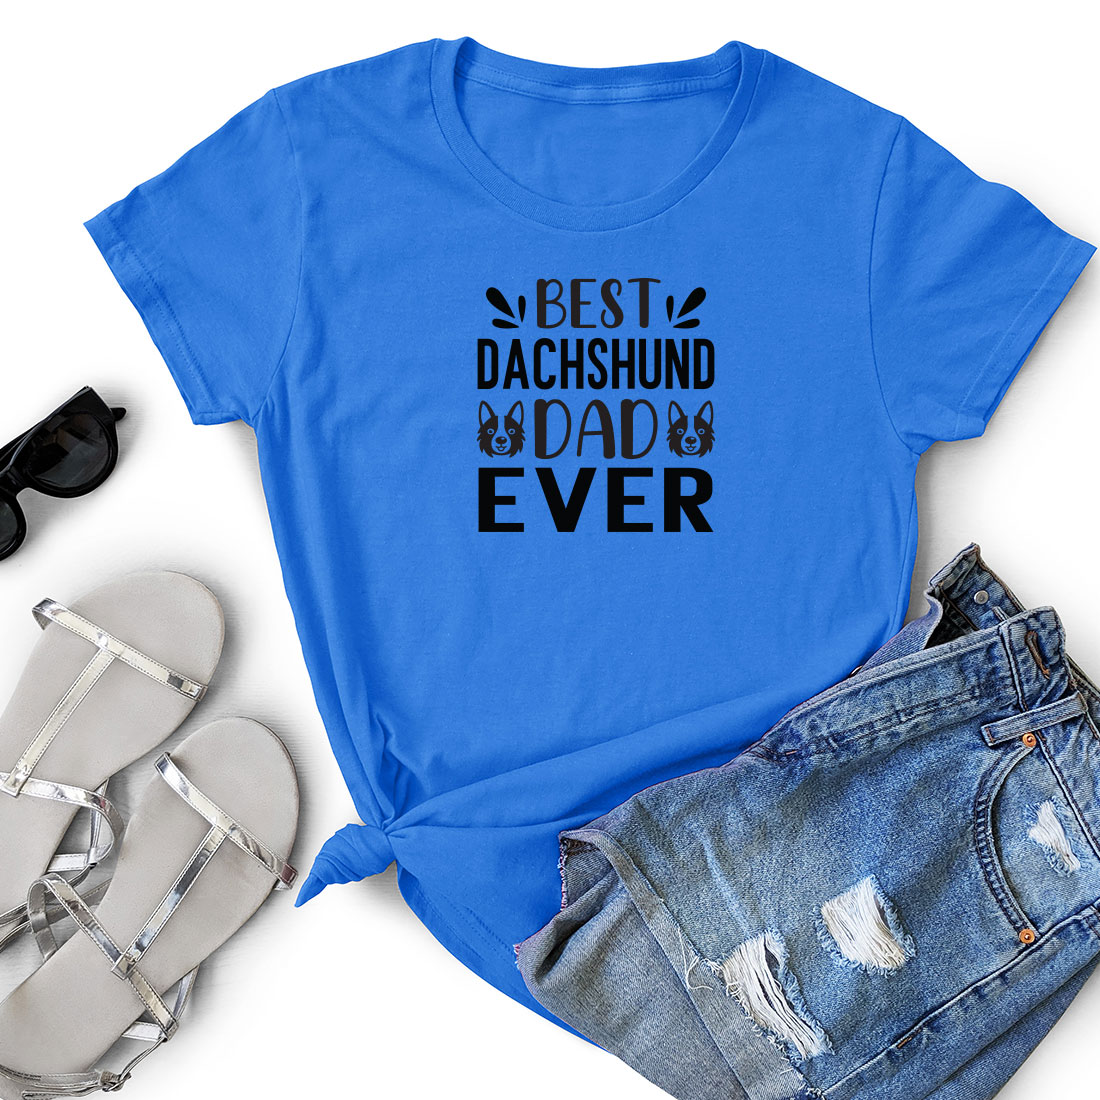 T - shirt that says best dachshund dad ever.